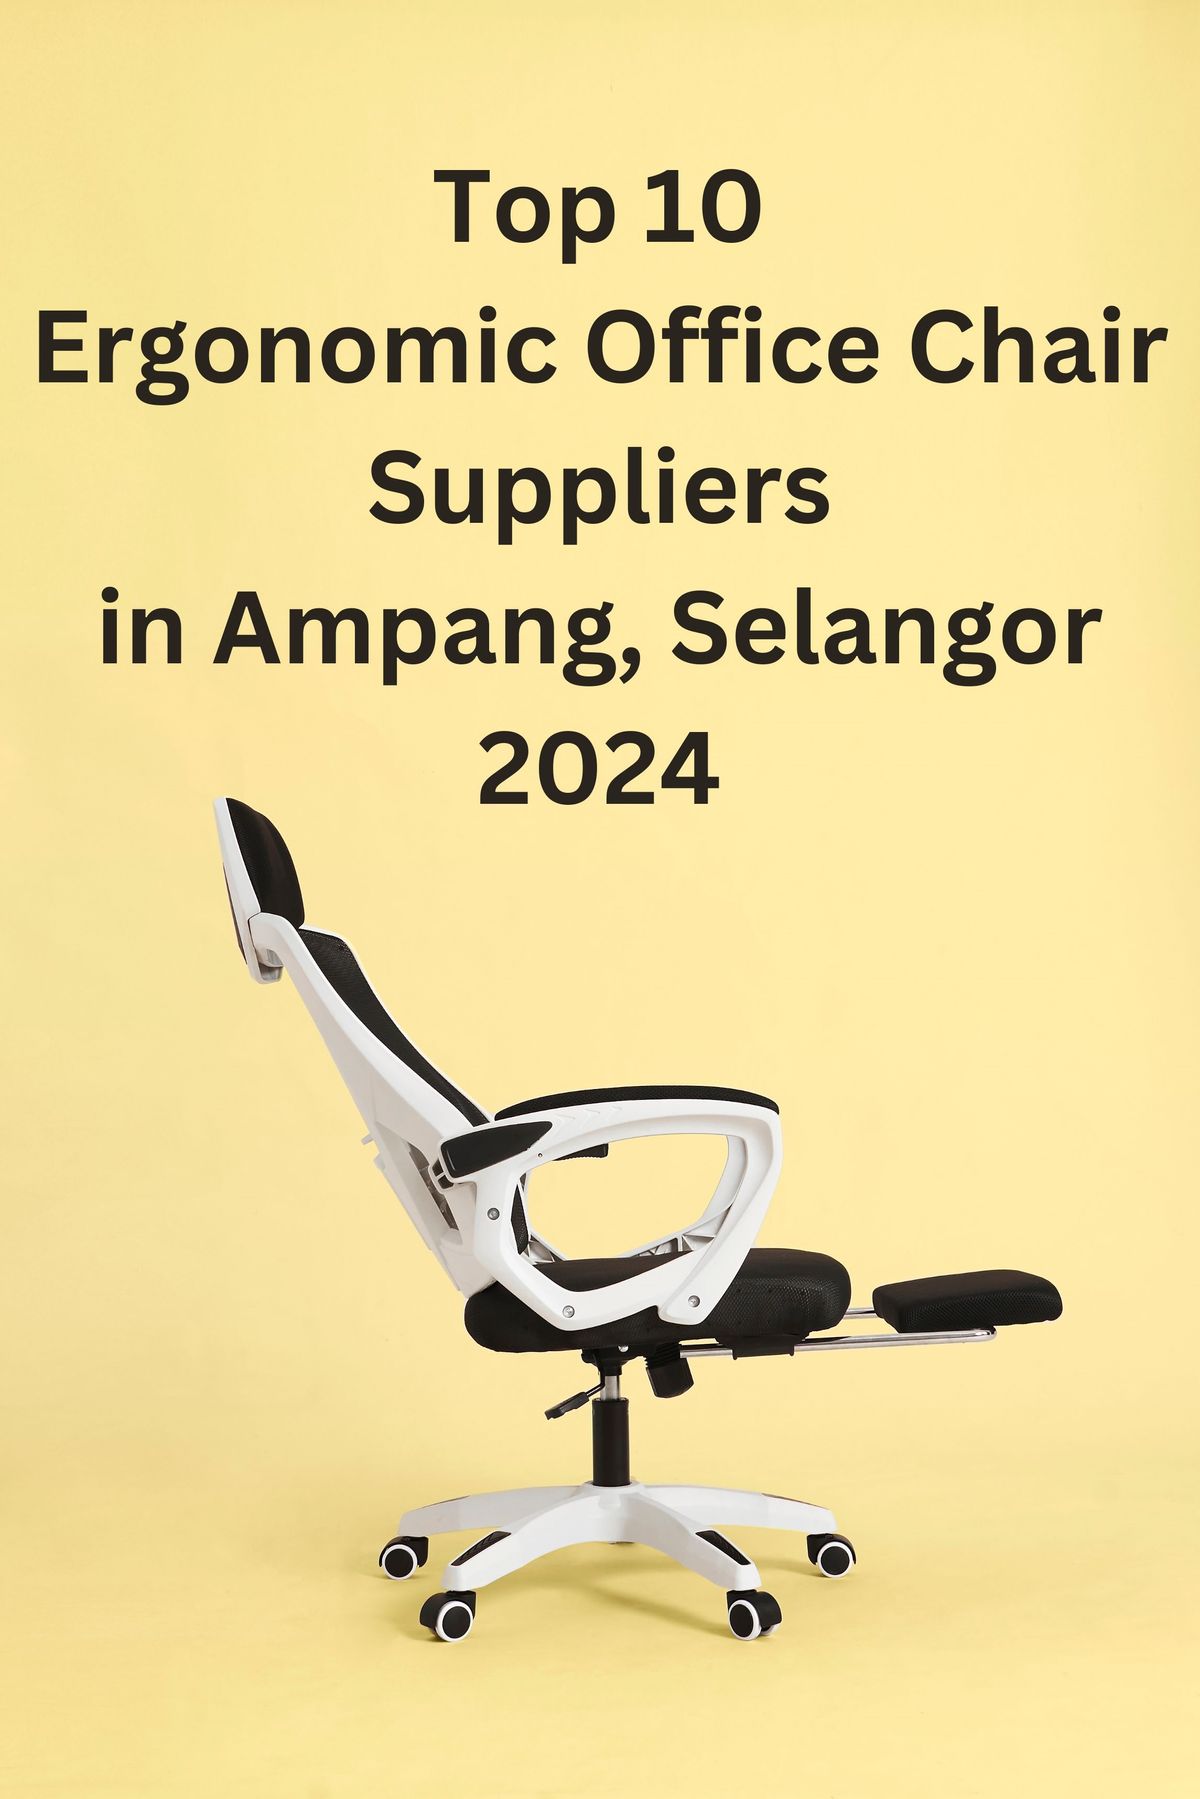 Top 10 Ergonomic Office Chair Suppliers For Your Office In Ampang, Selangor 2024